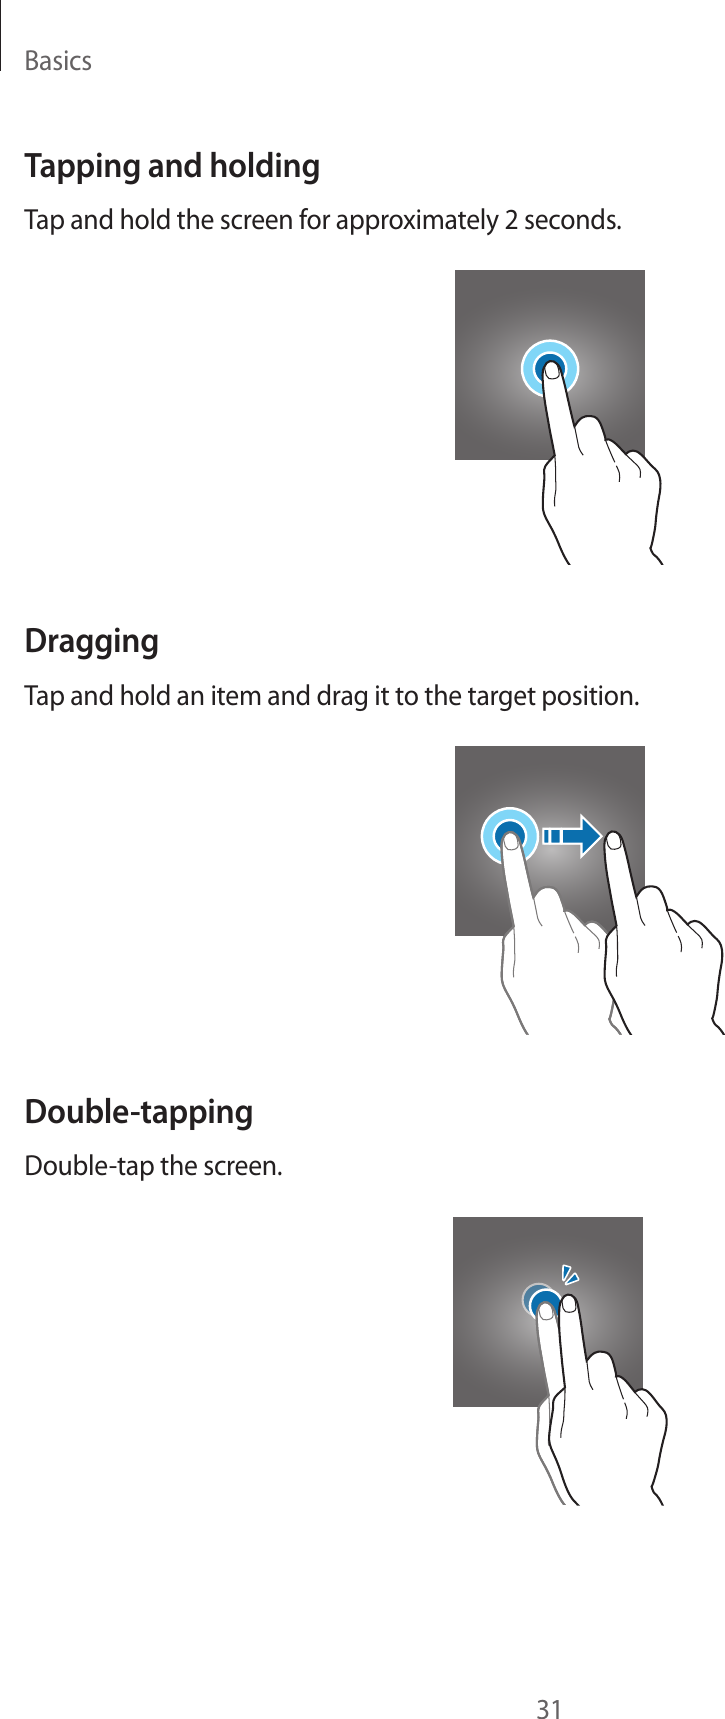 Basics31Tapping and holdingTap and hold the screen for approximately 2 seconds.DraggingTap and hold an item and drag it to the target position.Double-tappingDouble-tap the screen.